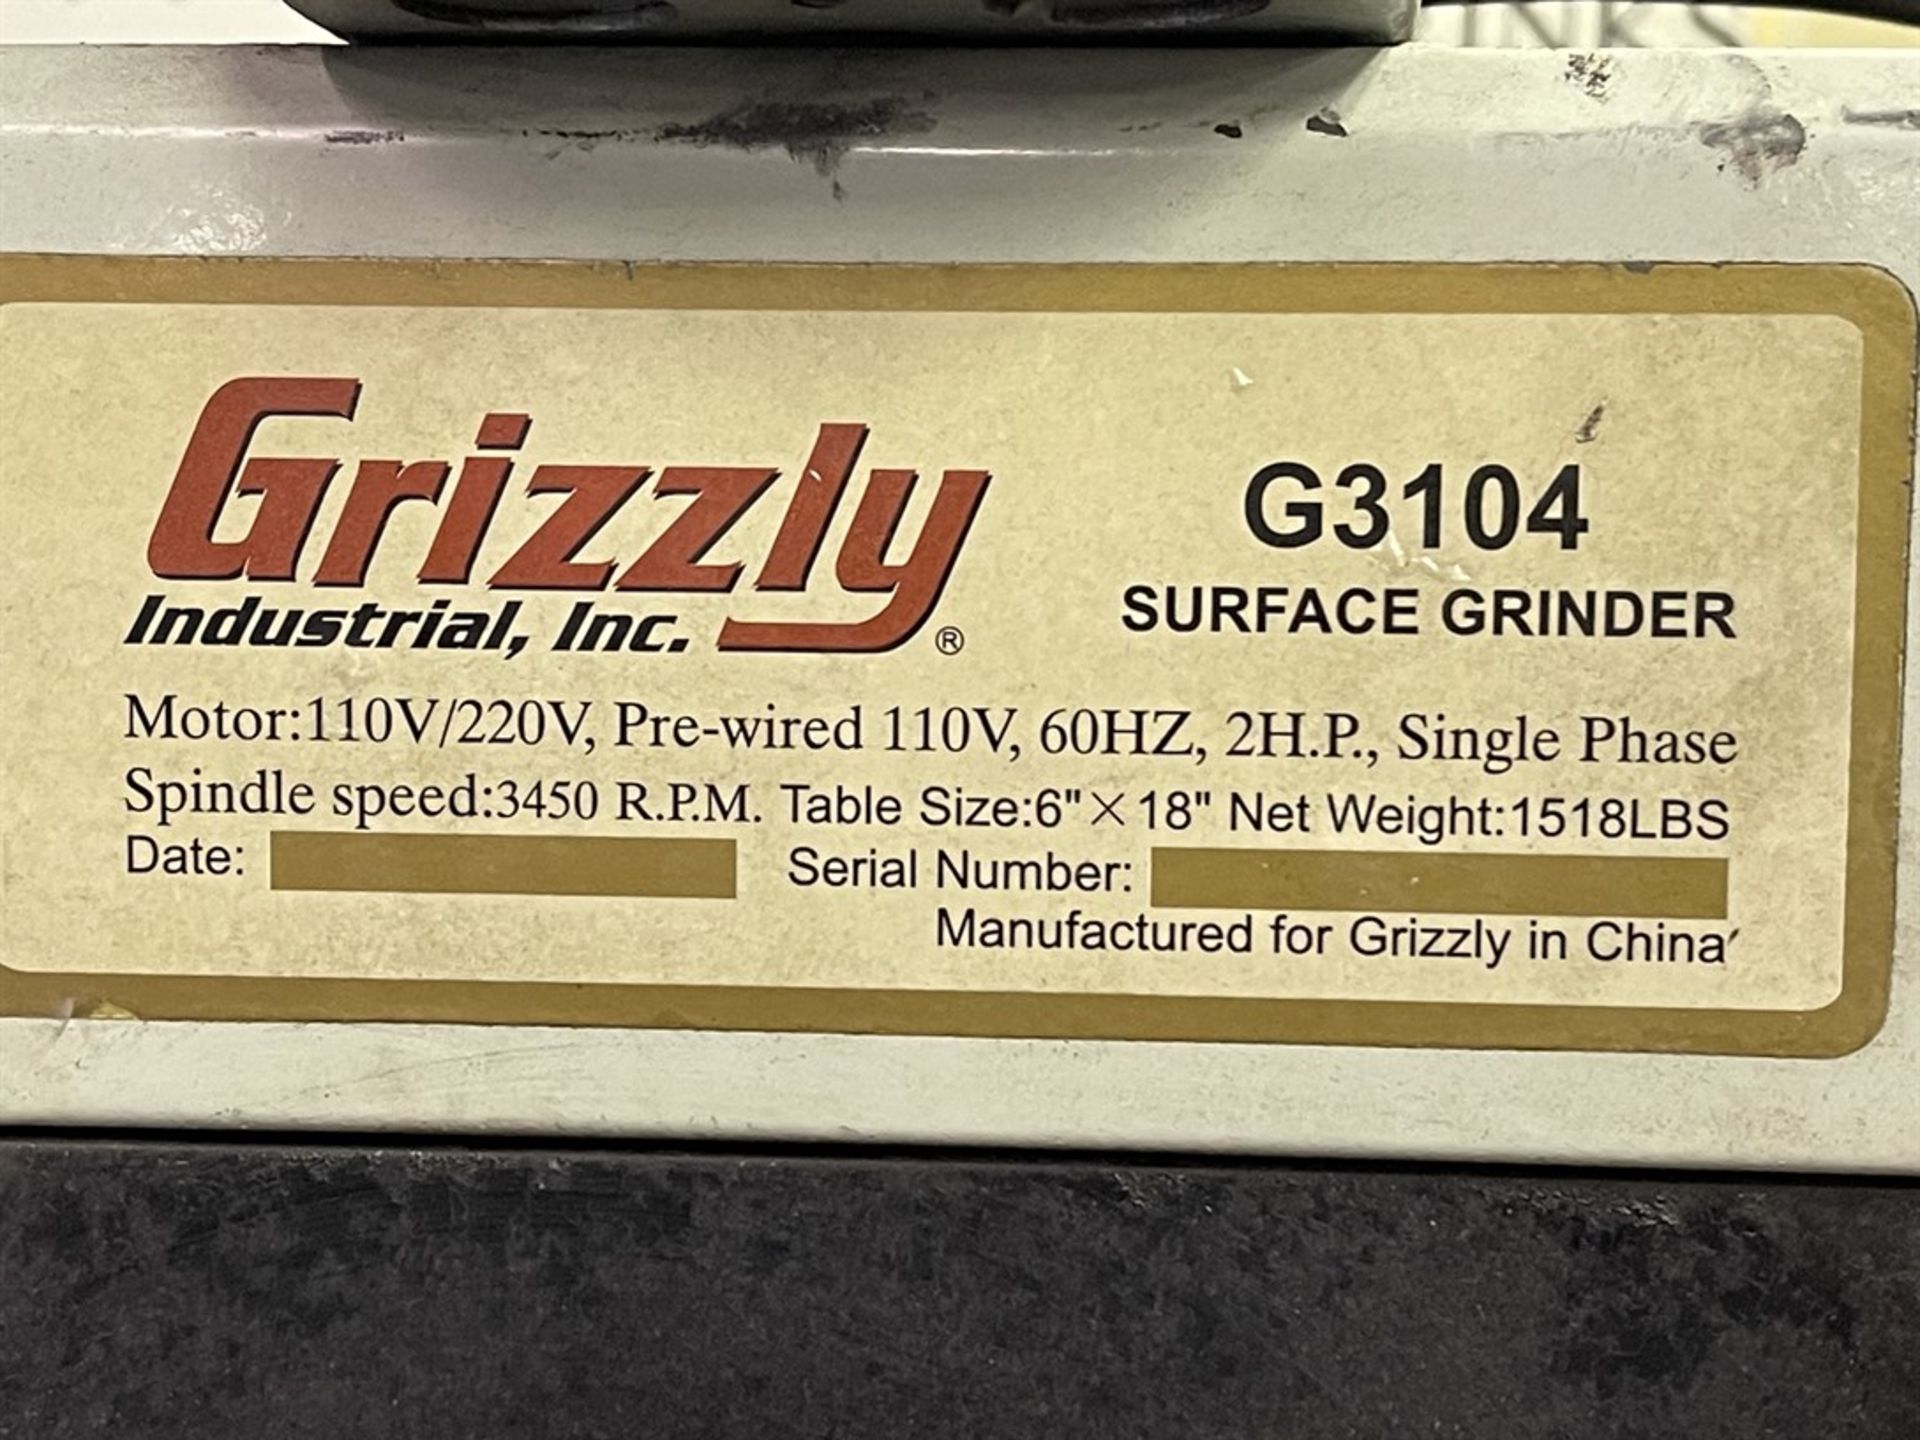 Grizzly G3104 Surface Grinder, 6"x 18" Magnetic Chuck, 3450 RPM, 2 HP, Single Phase - Image 5 of 5